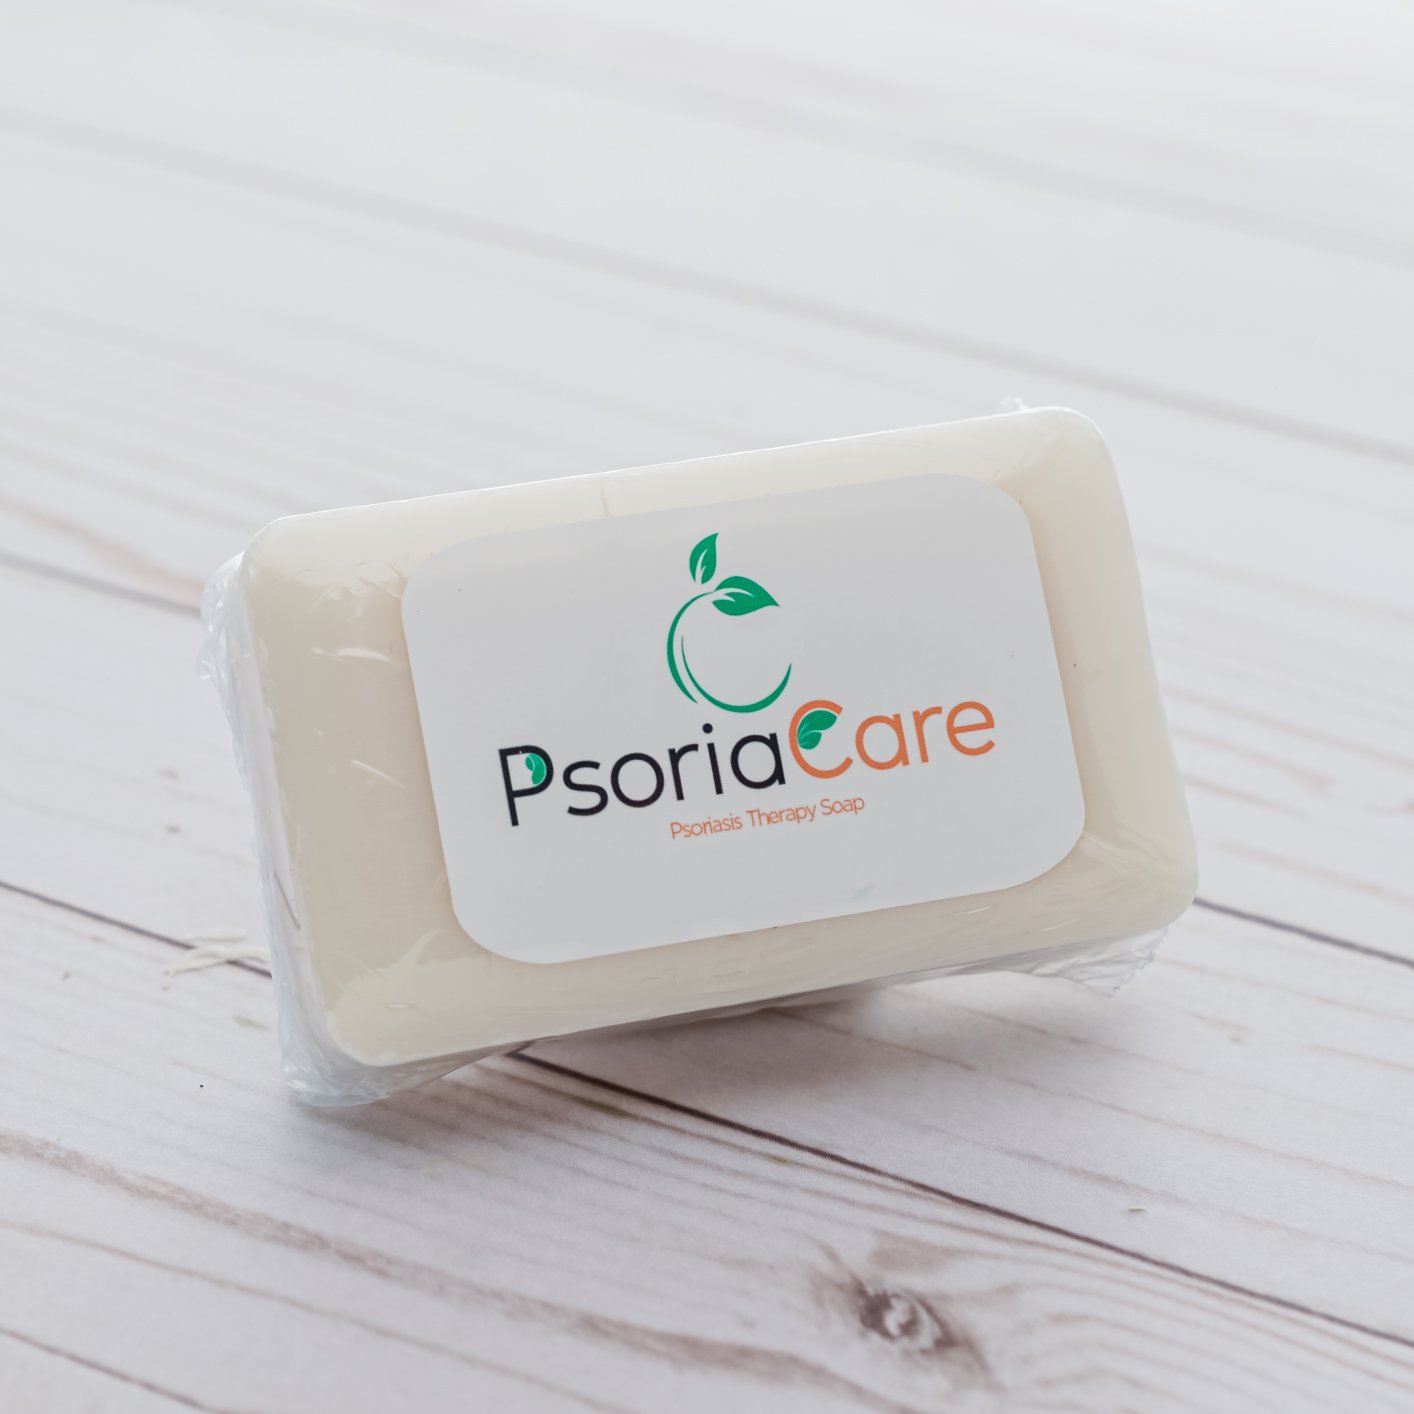 PsoriaSoap - Inflammation Therapy Bar